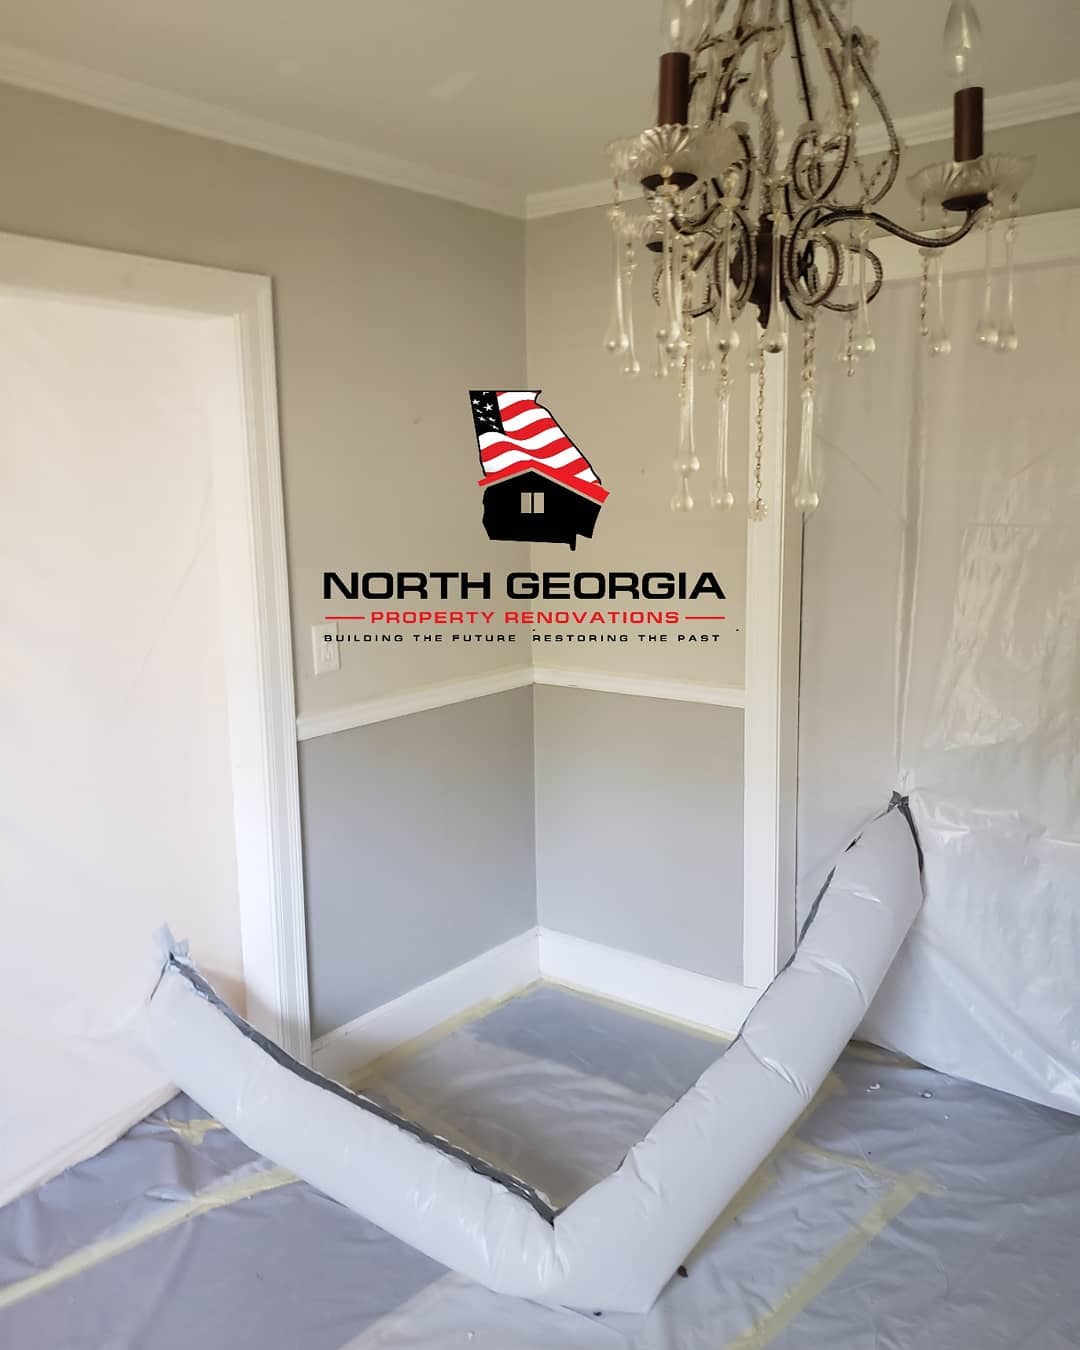 North Georgia Roofing and Property Renovations_Water Damage_Water Mitigation Services